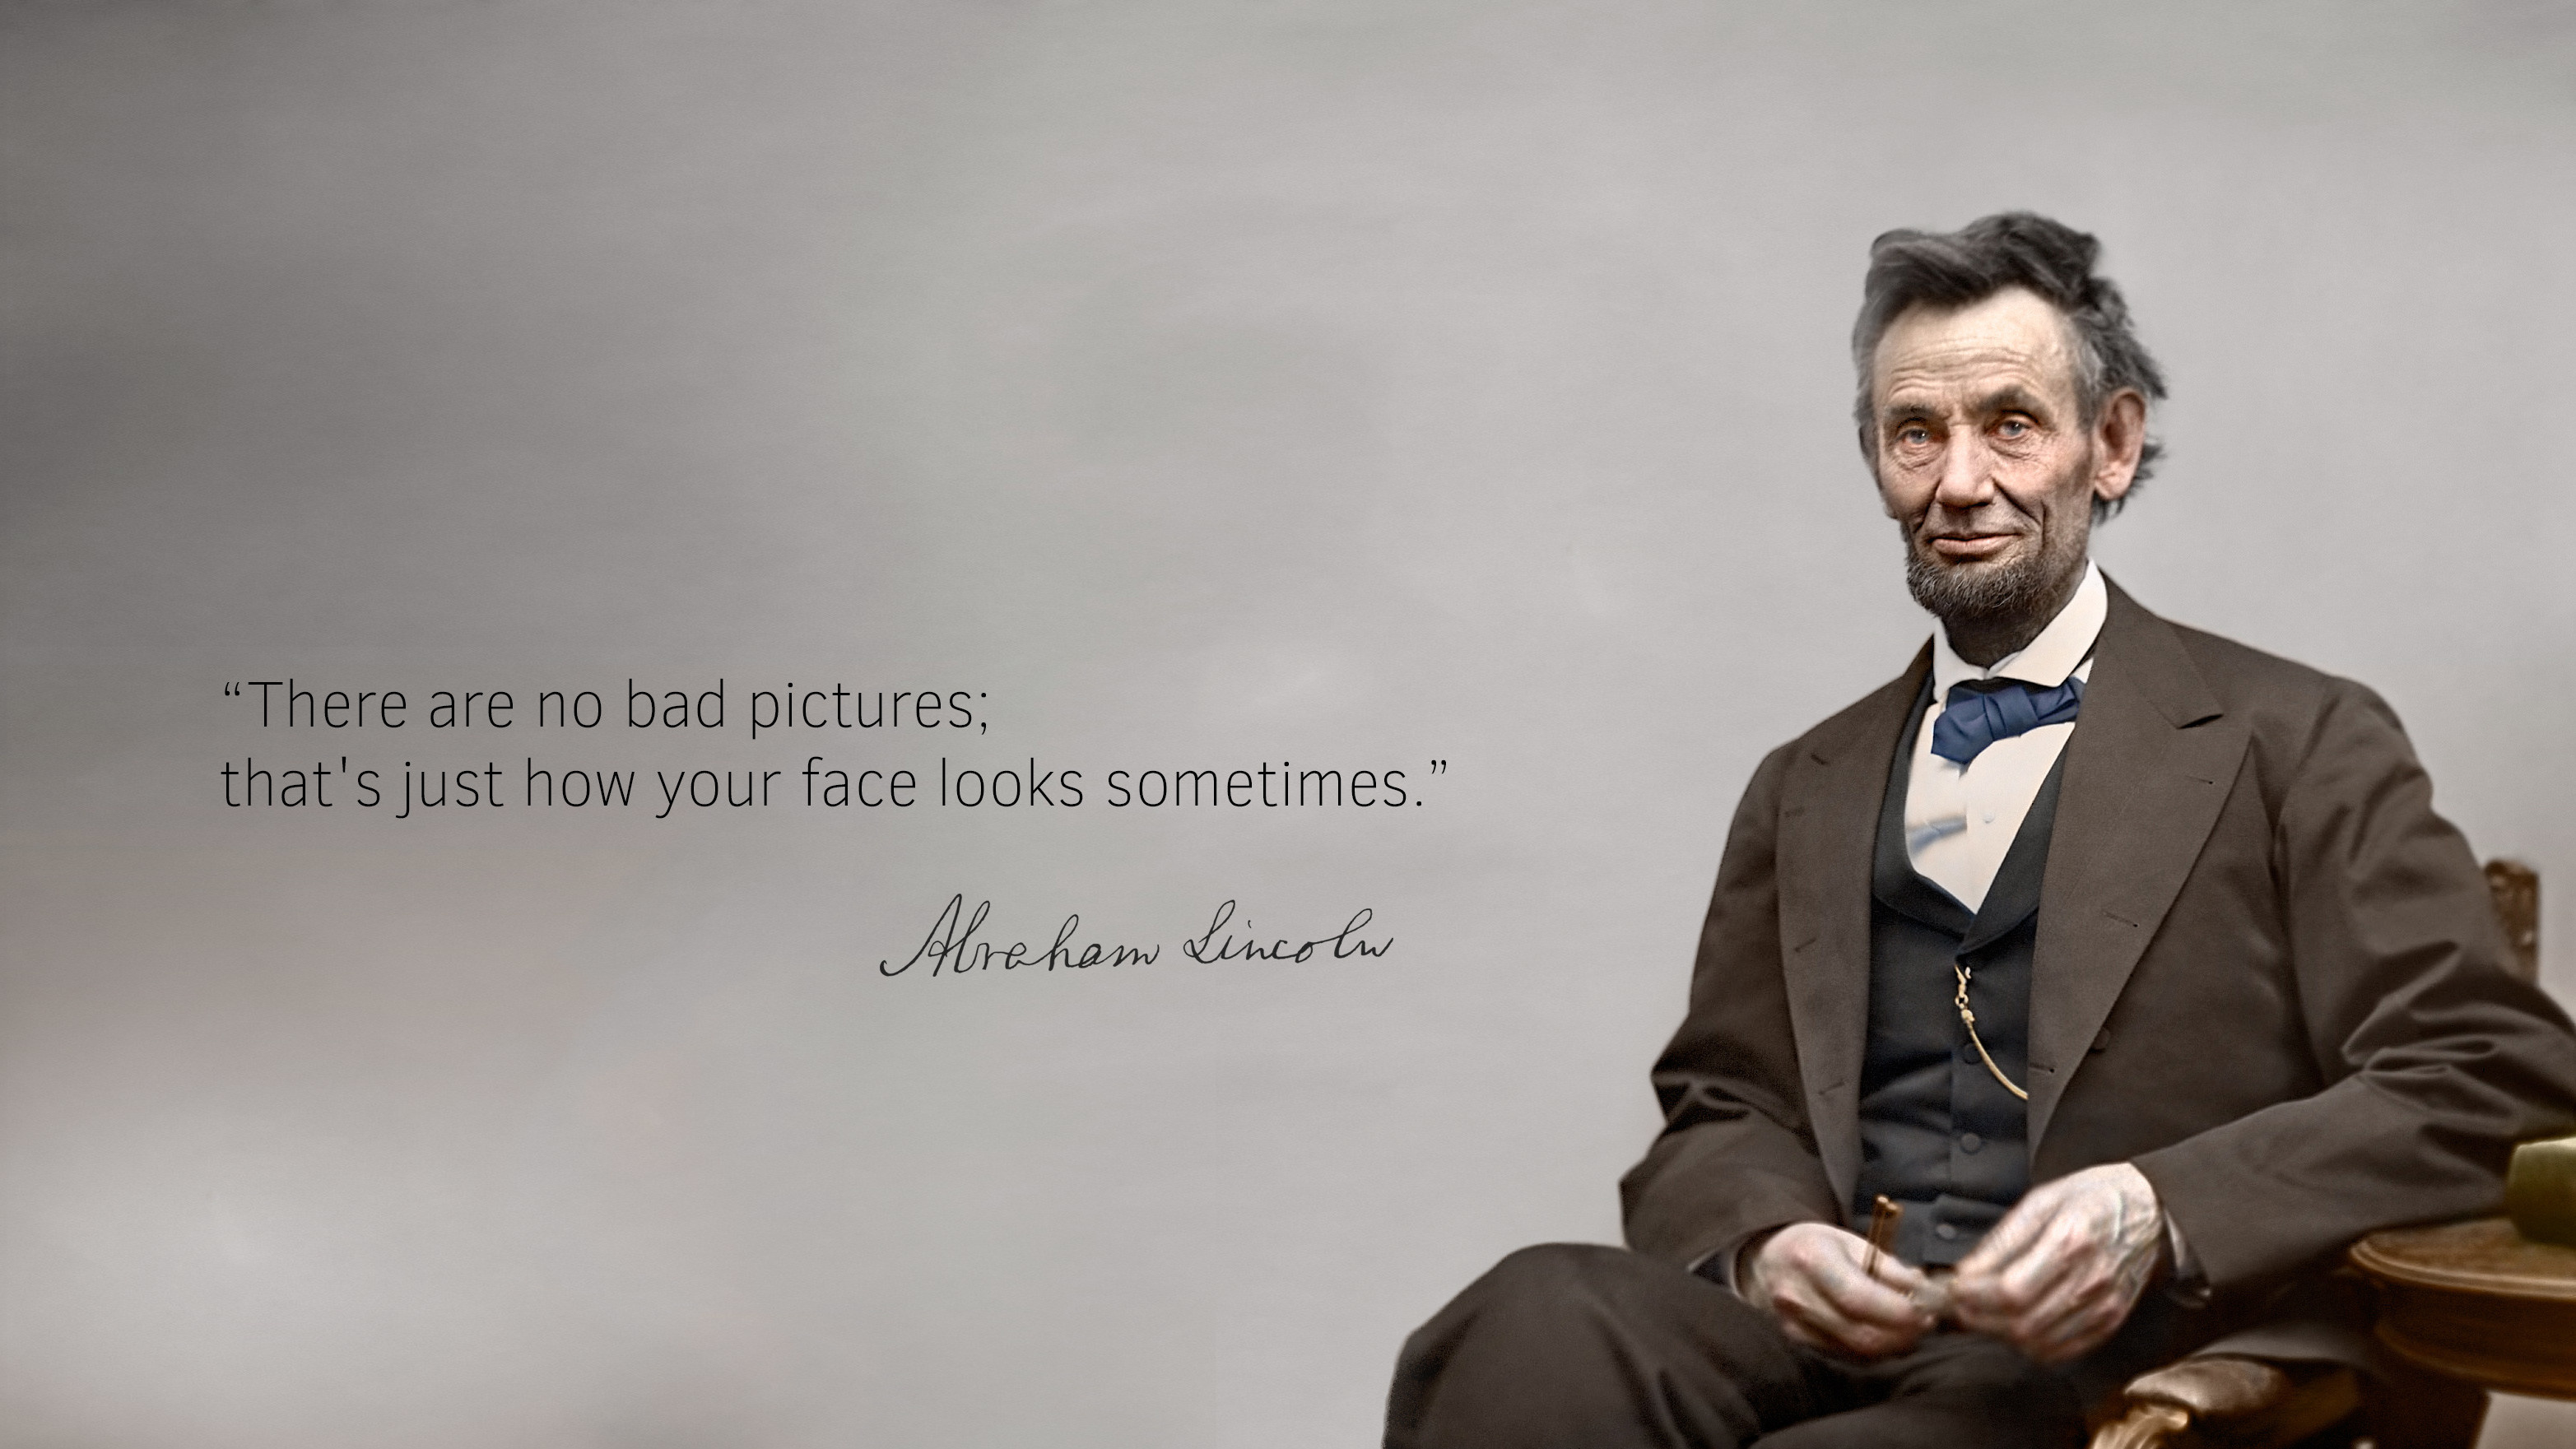 Abraham Lincoln tribute, Distinguished historical figure, Inspirational leader, Iconic American, 3130x1770 HD Desktop